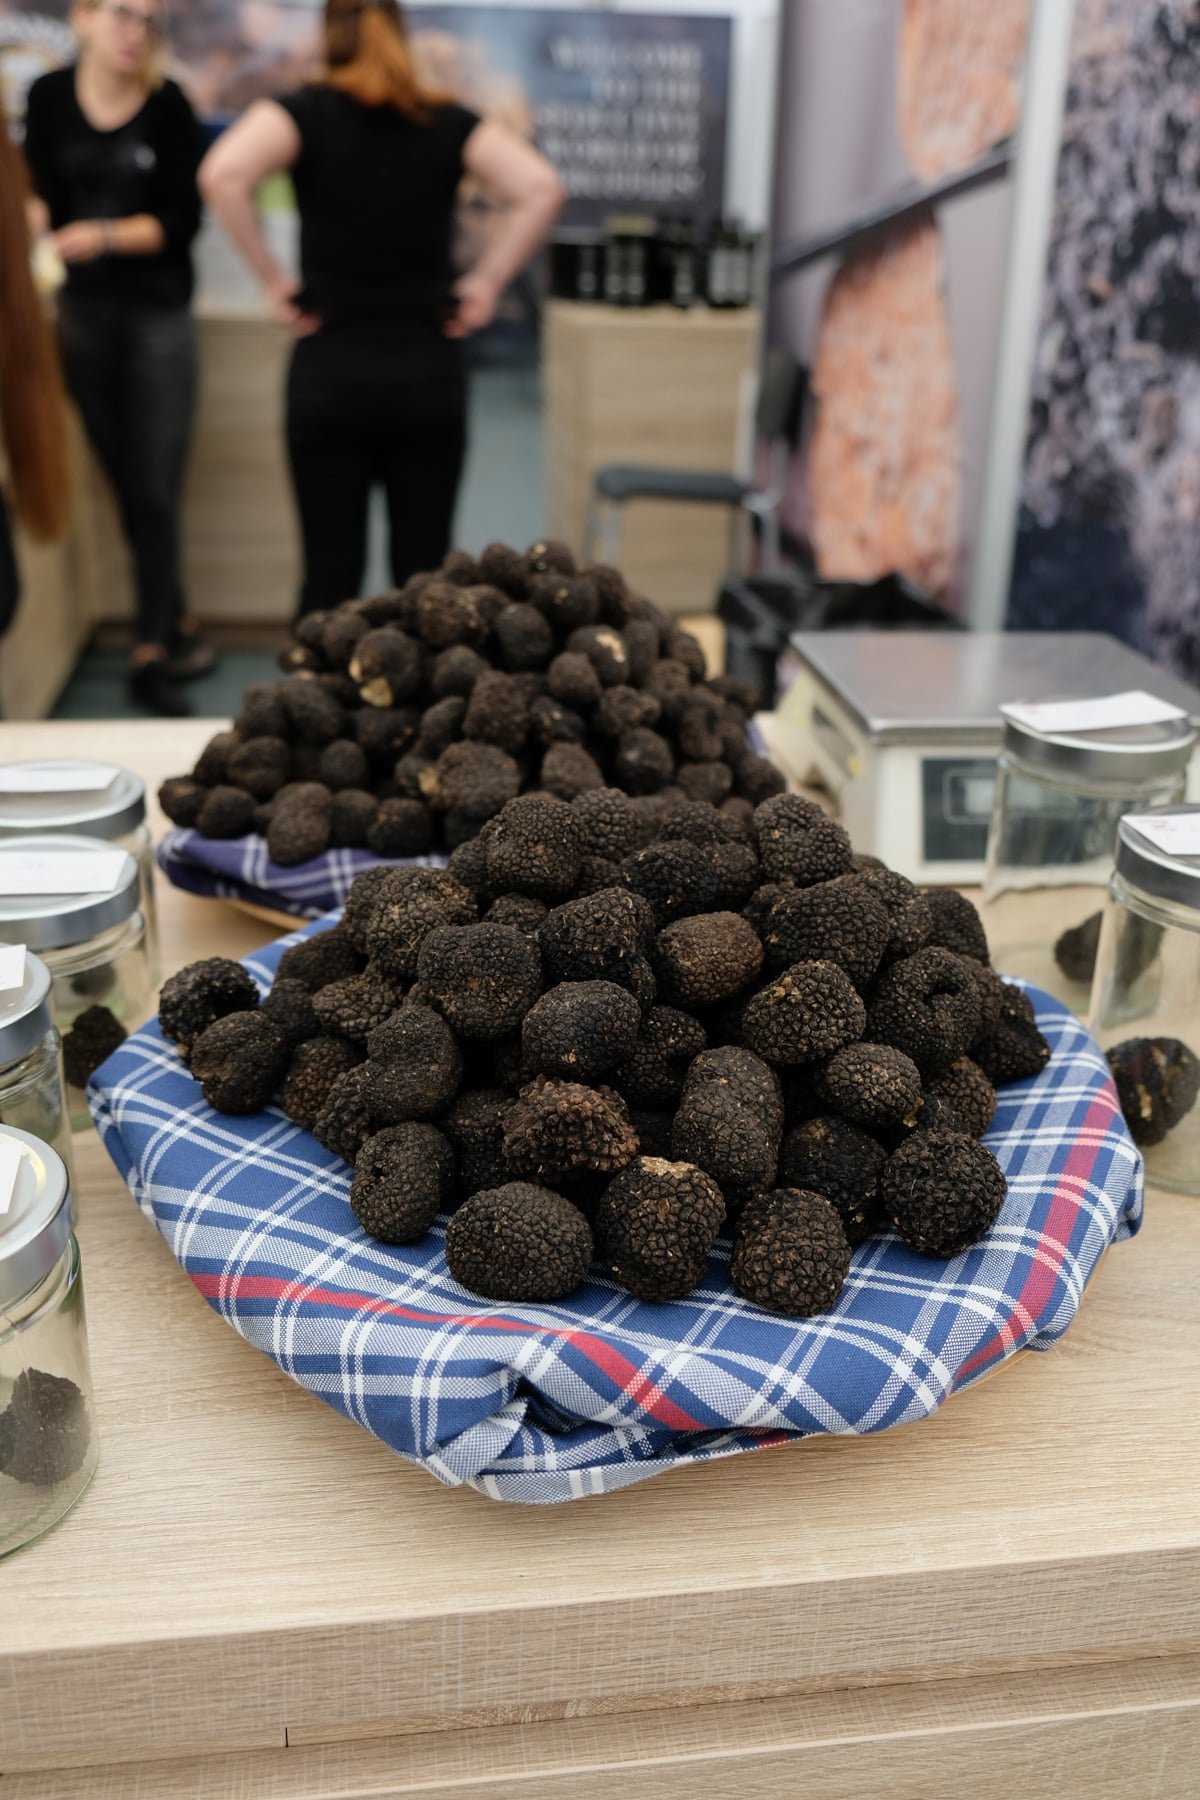 Istria black truffles on a table in front of a group of people.